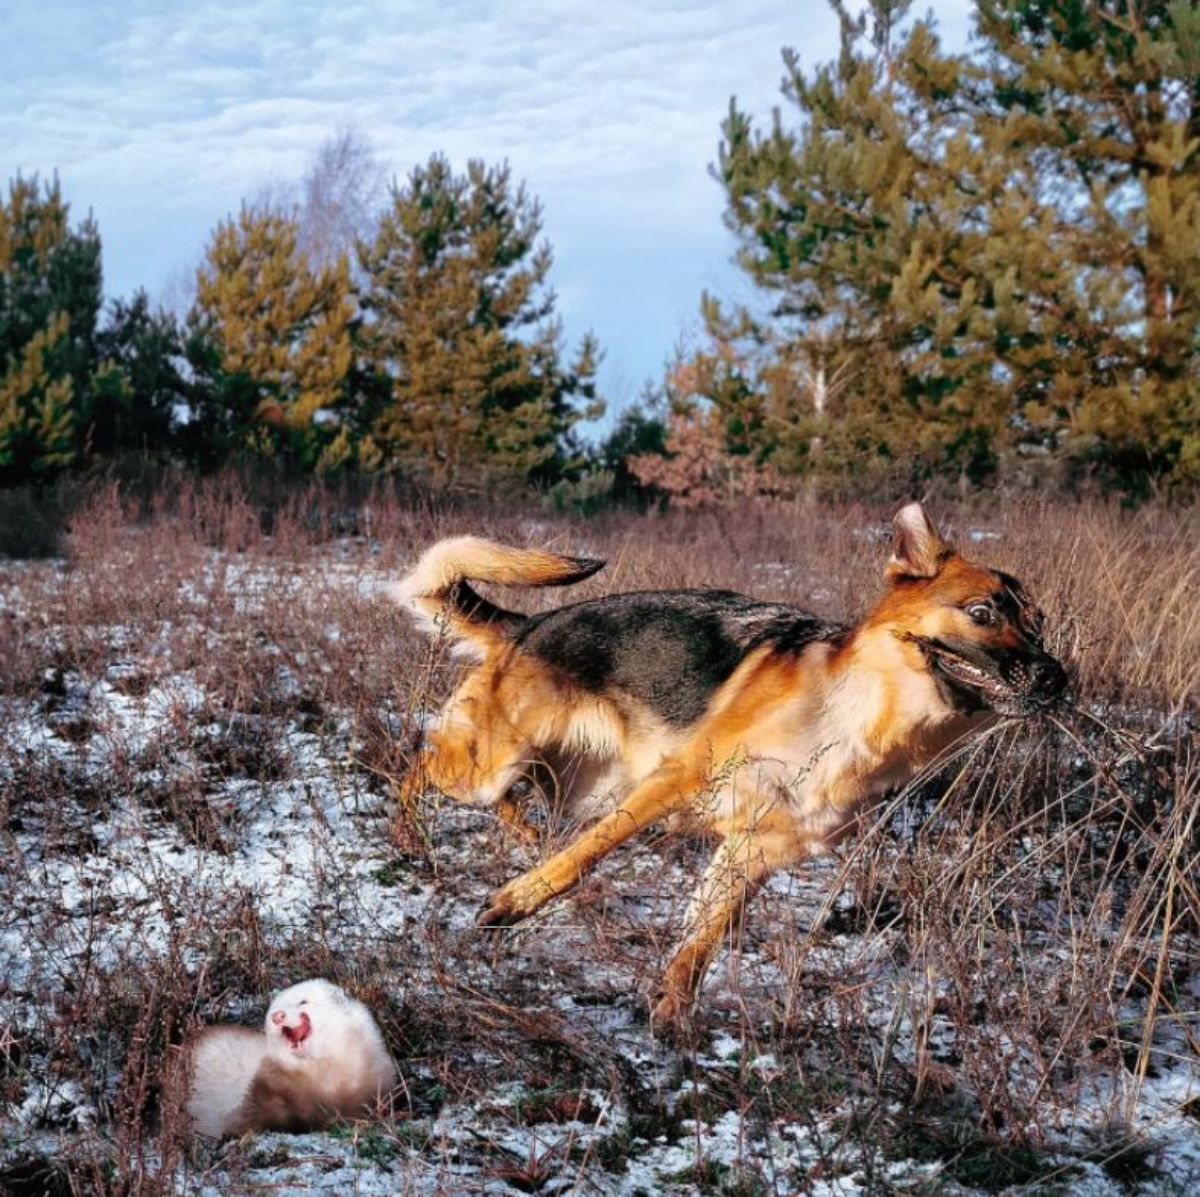 german shepherd caught mid-run with brown and white ferret on the ground